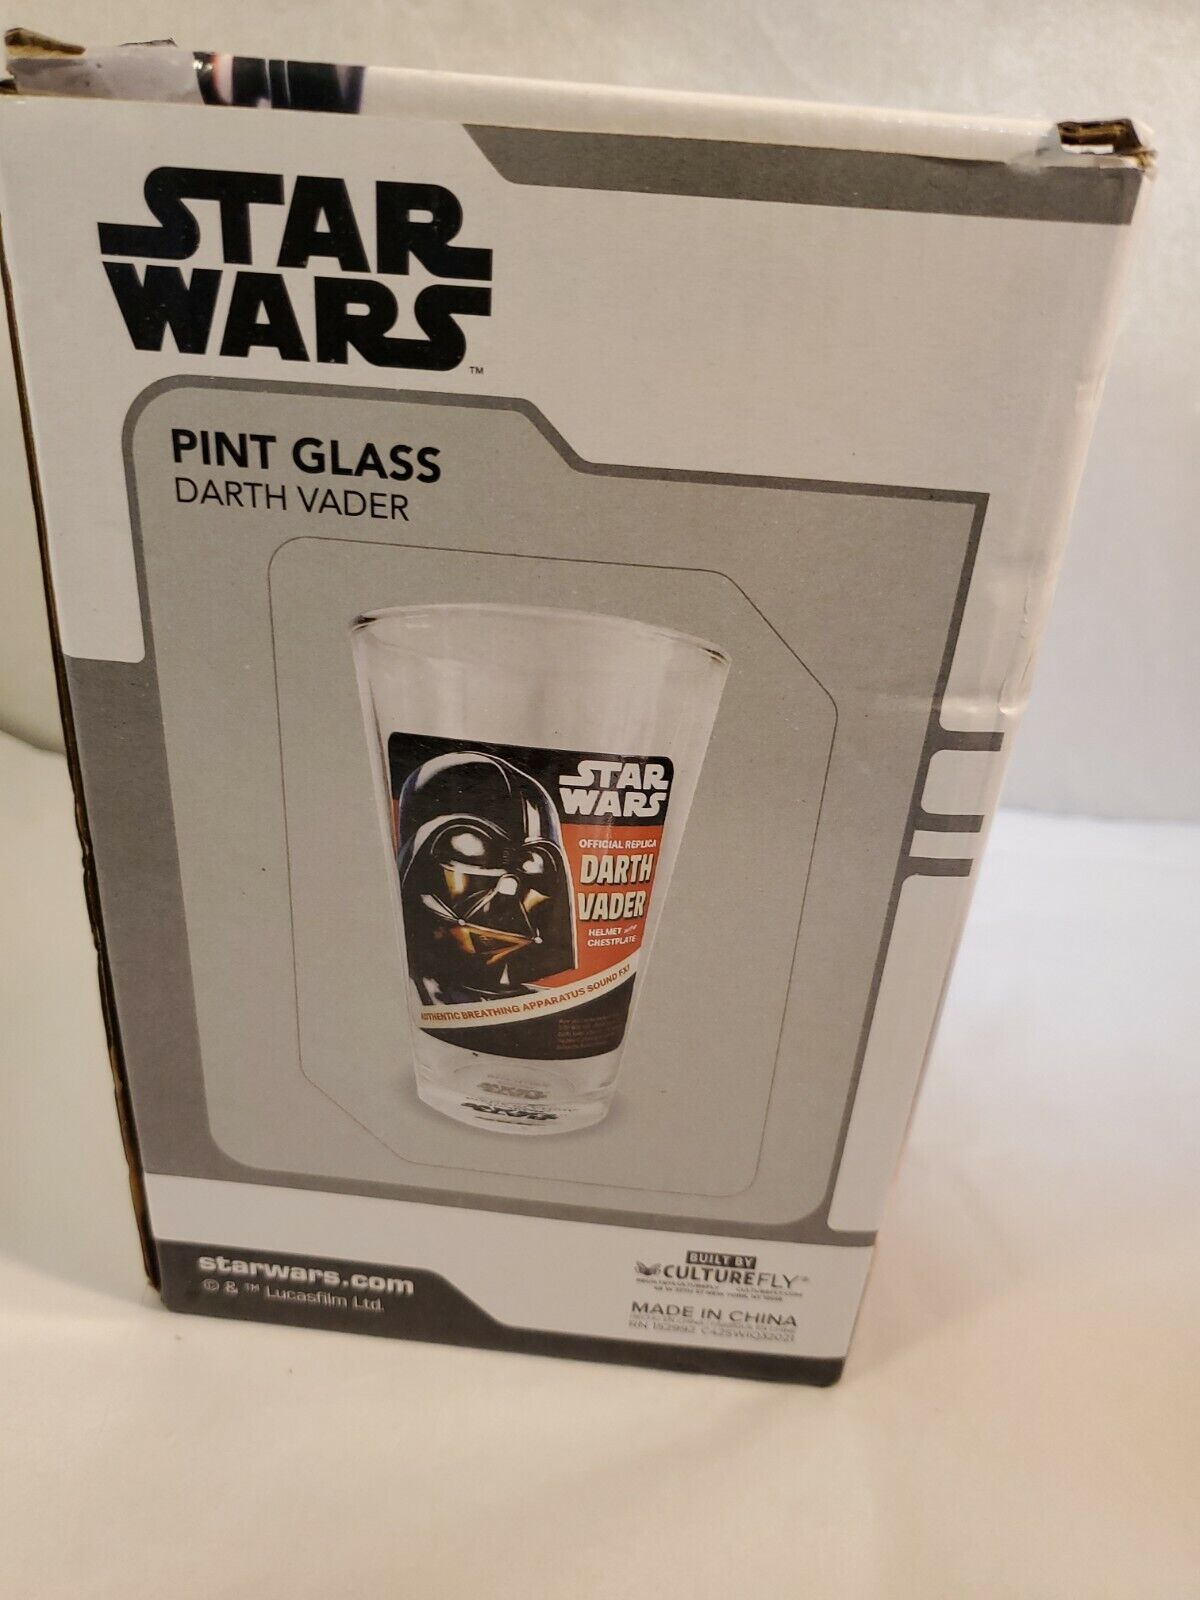 Star Wars Darth Vader ClutureFly Exclusive Pint Glass